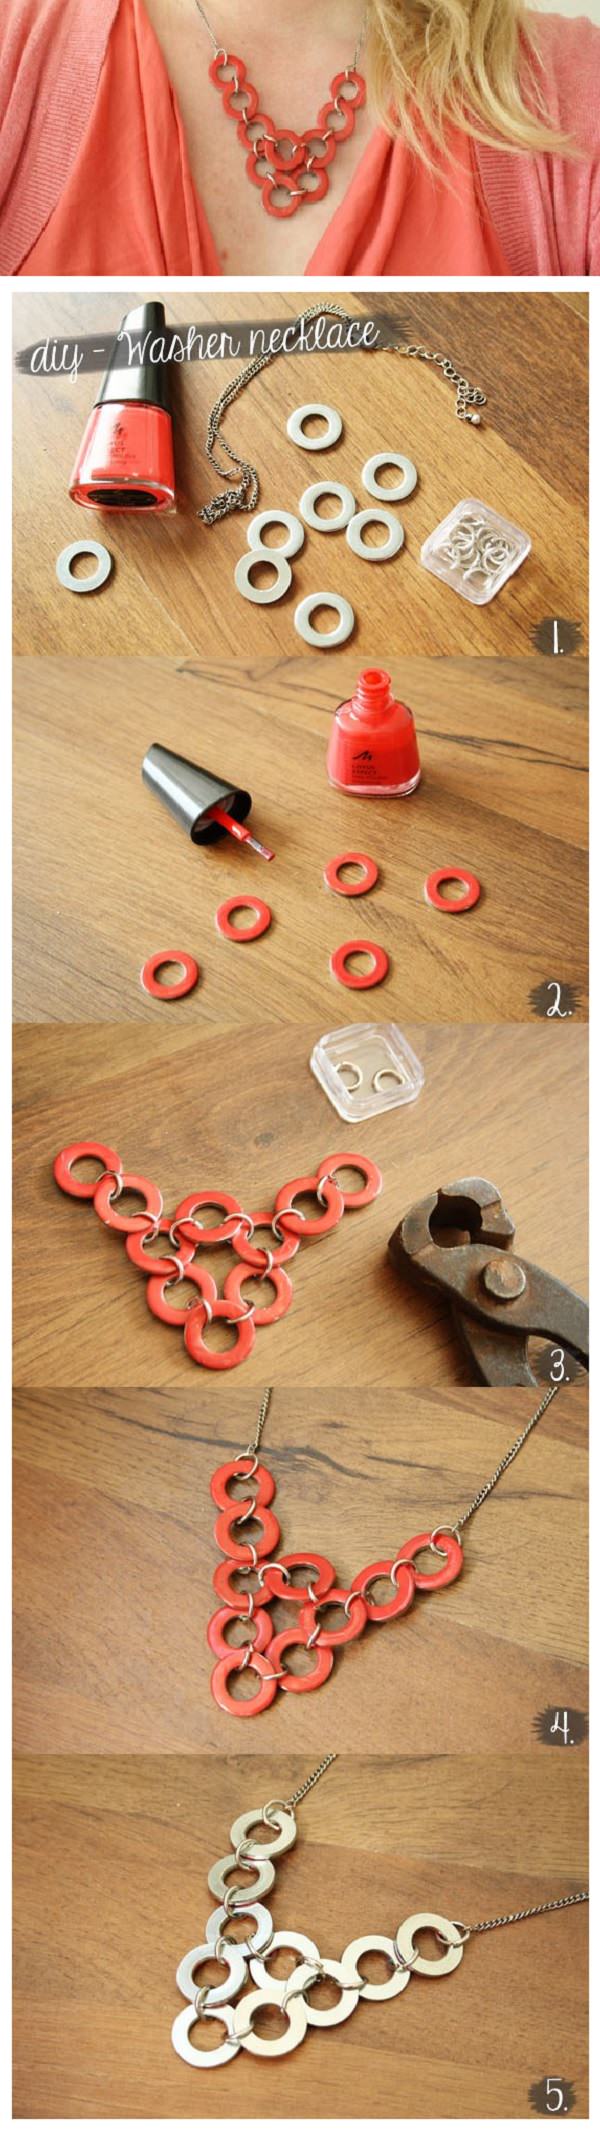 DIY Washer Necklace